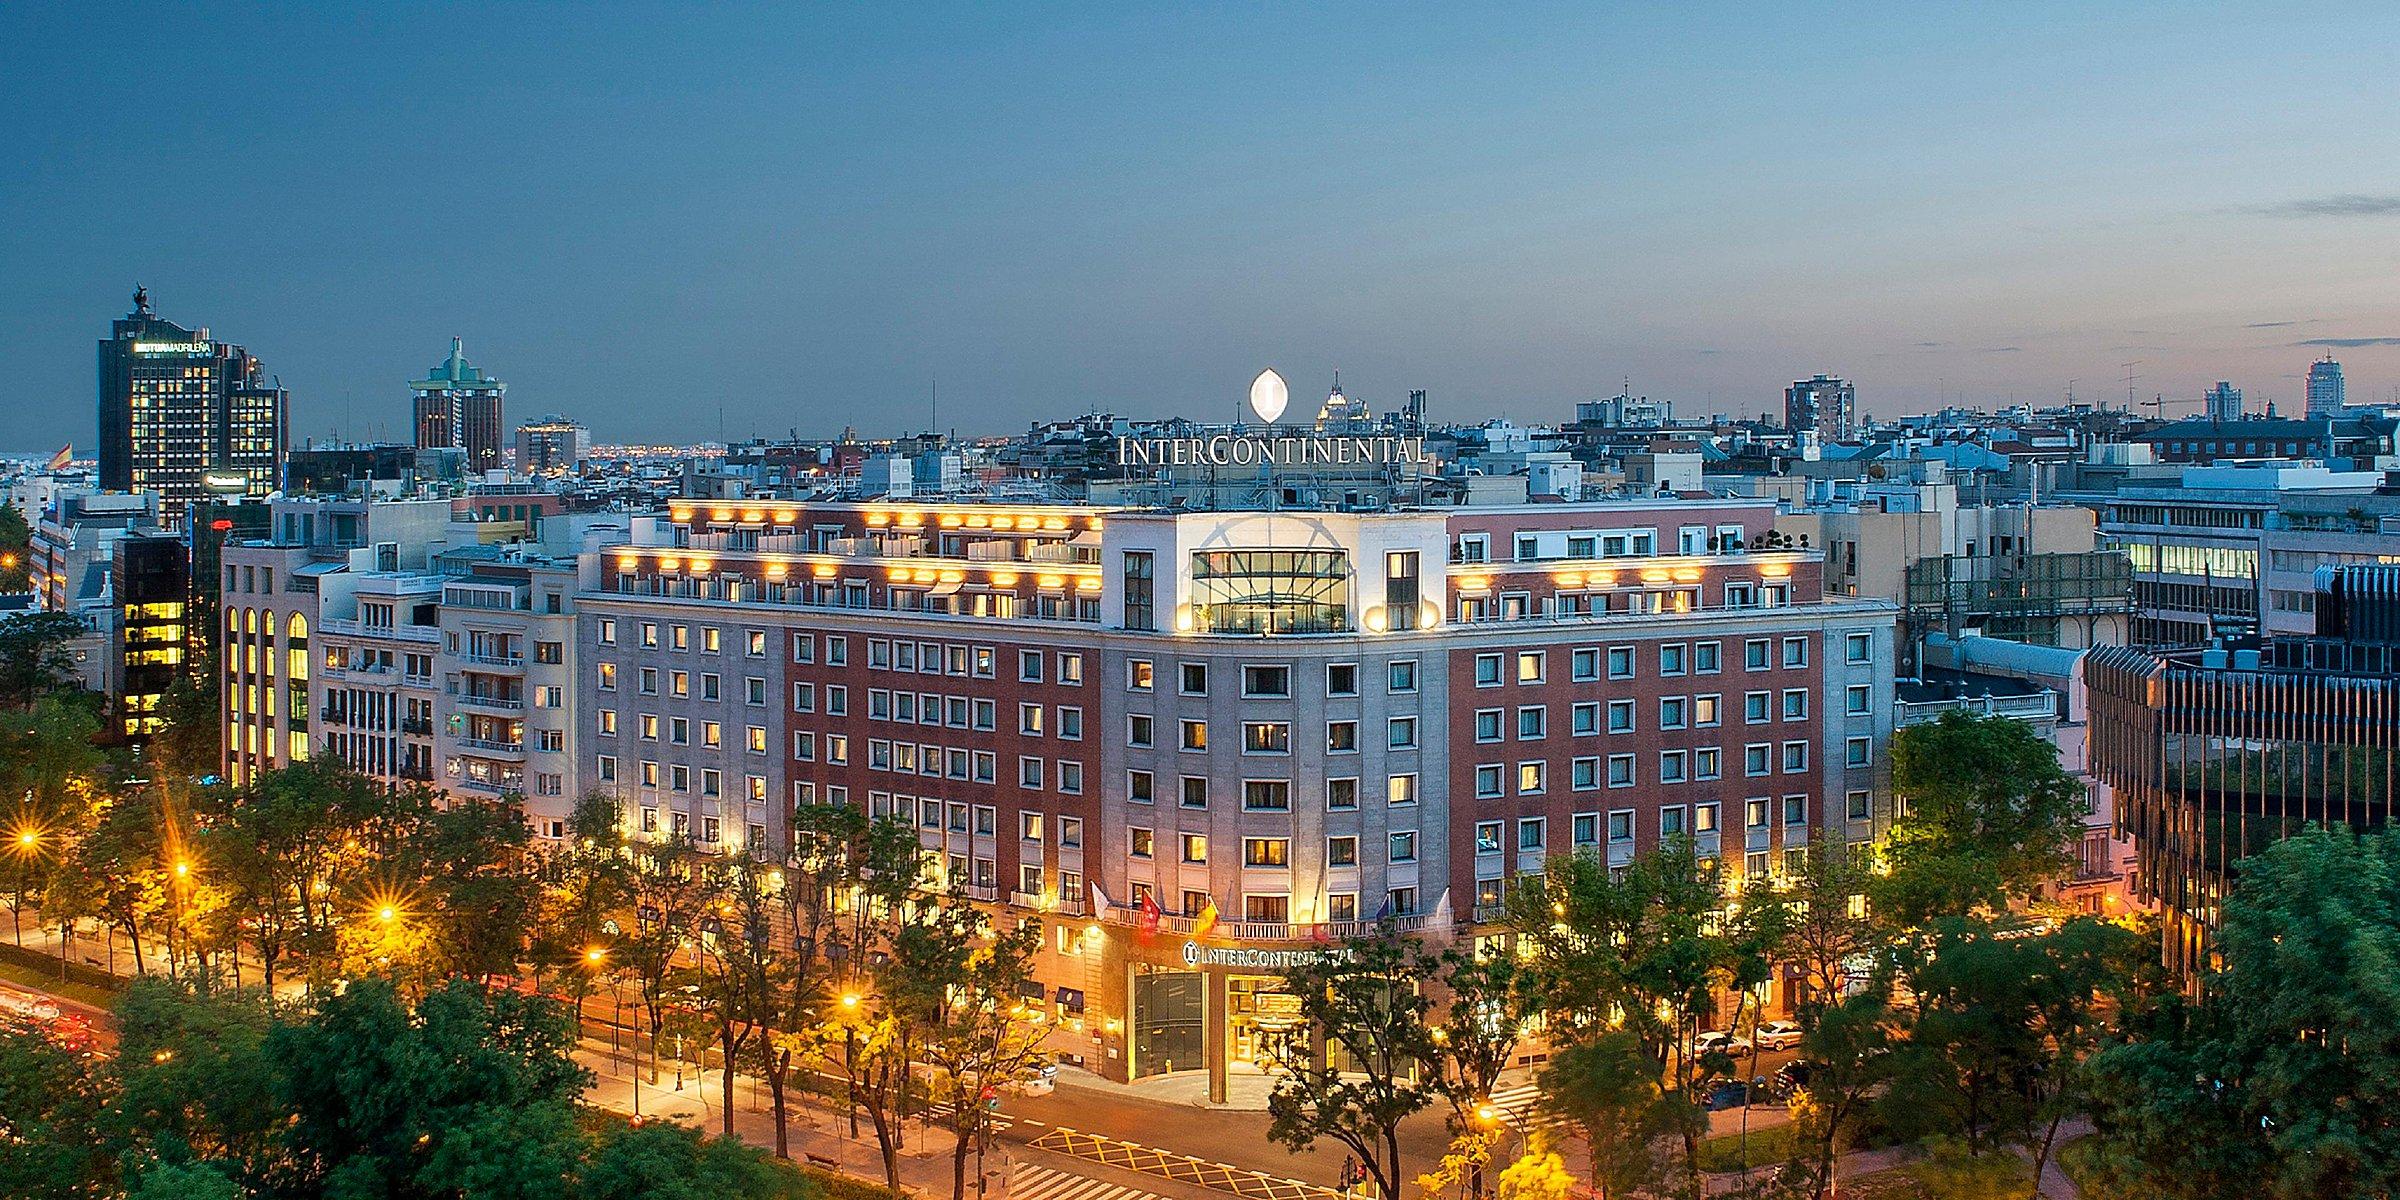 Top 5 Rated Best Value Family Friendly Hotels in Madrid